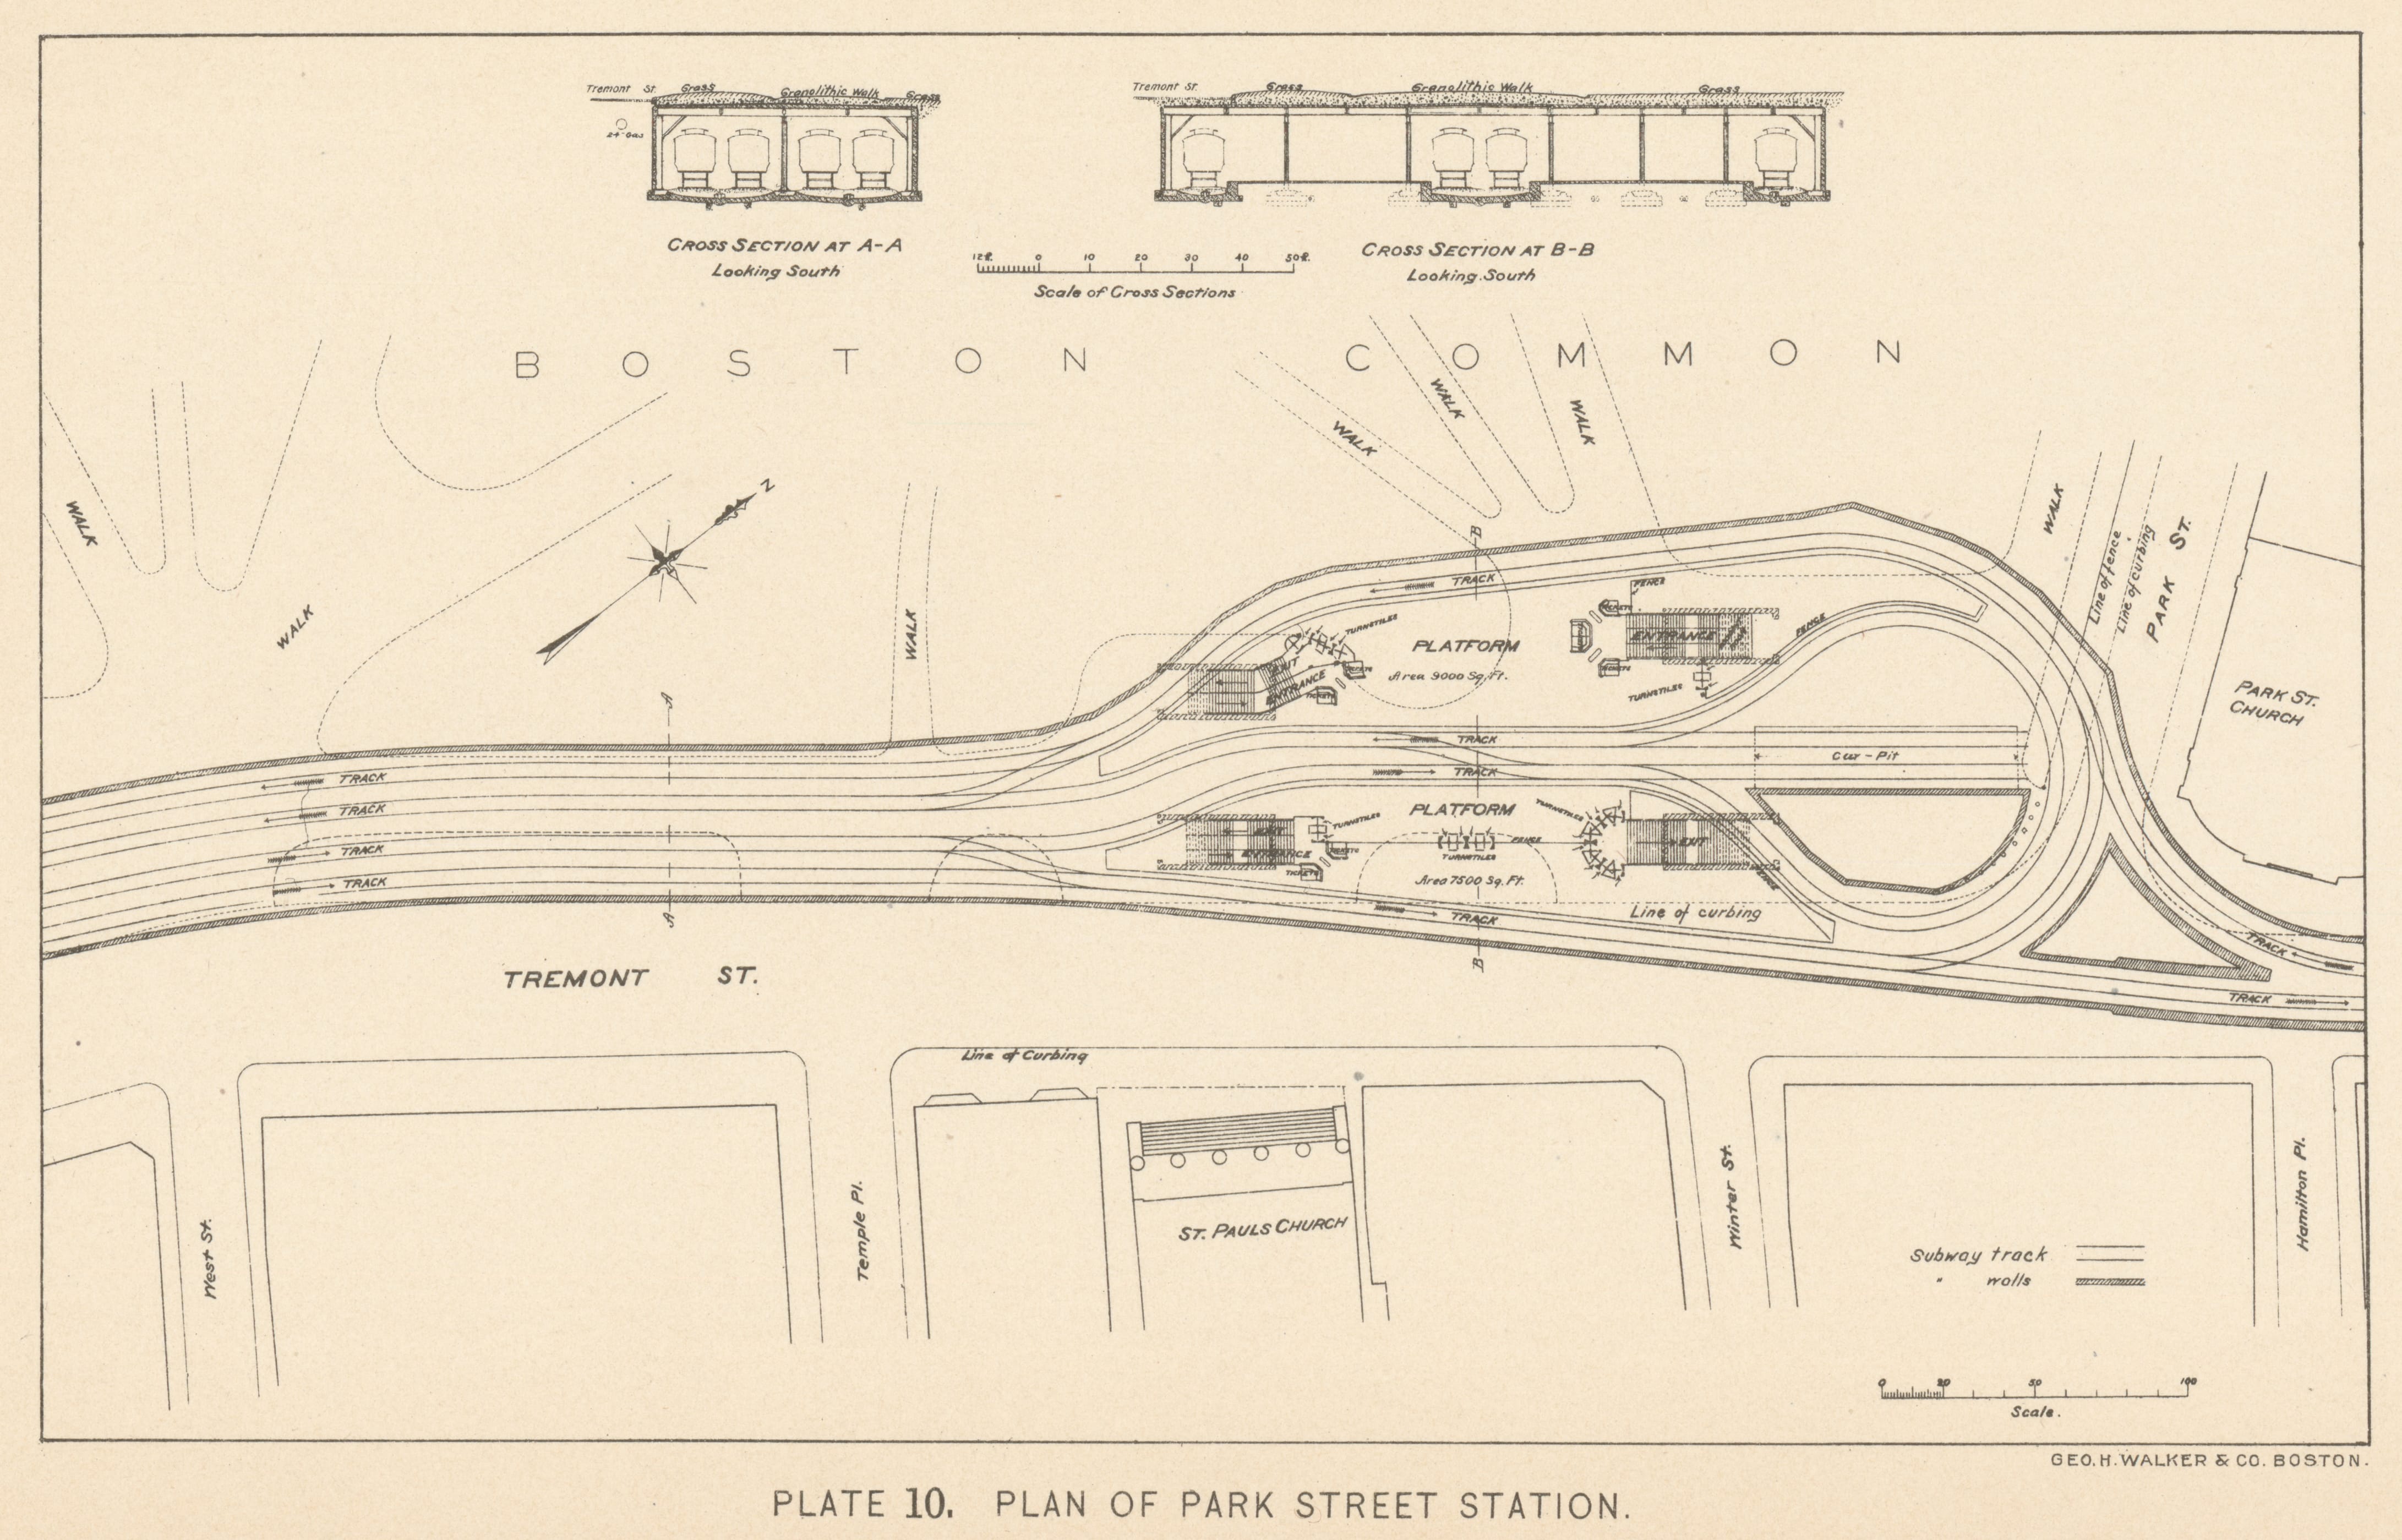 Image of “Plate 10” from “Fourth Annual Report of the Boston Transit Commission”